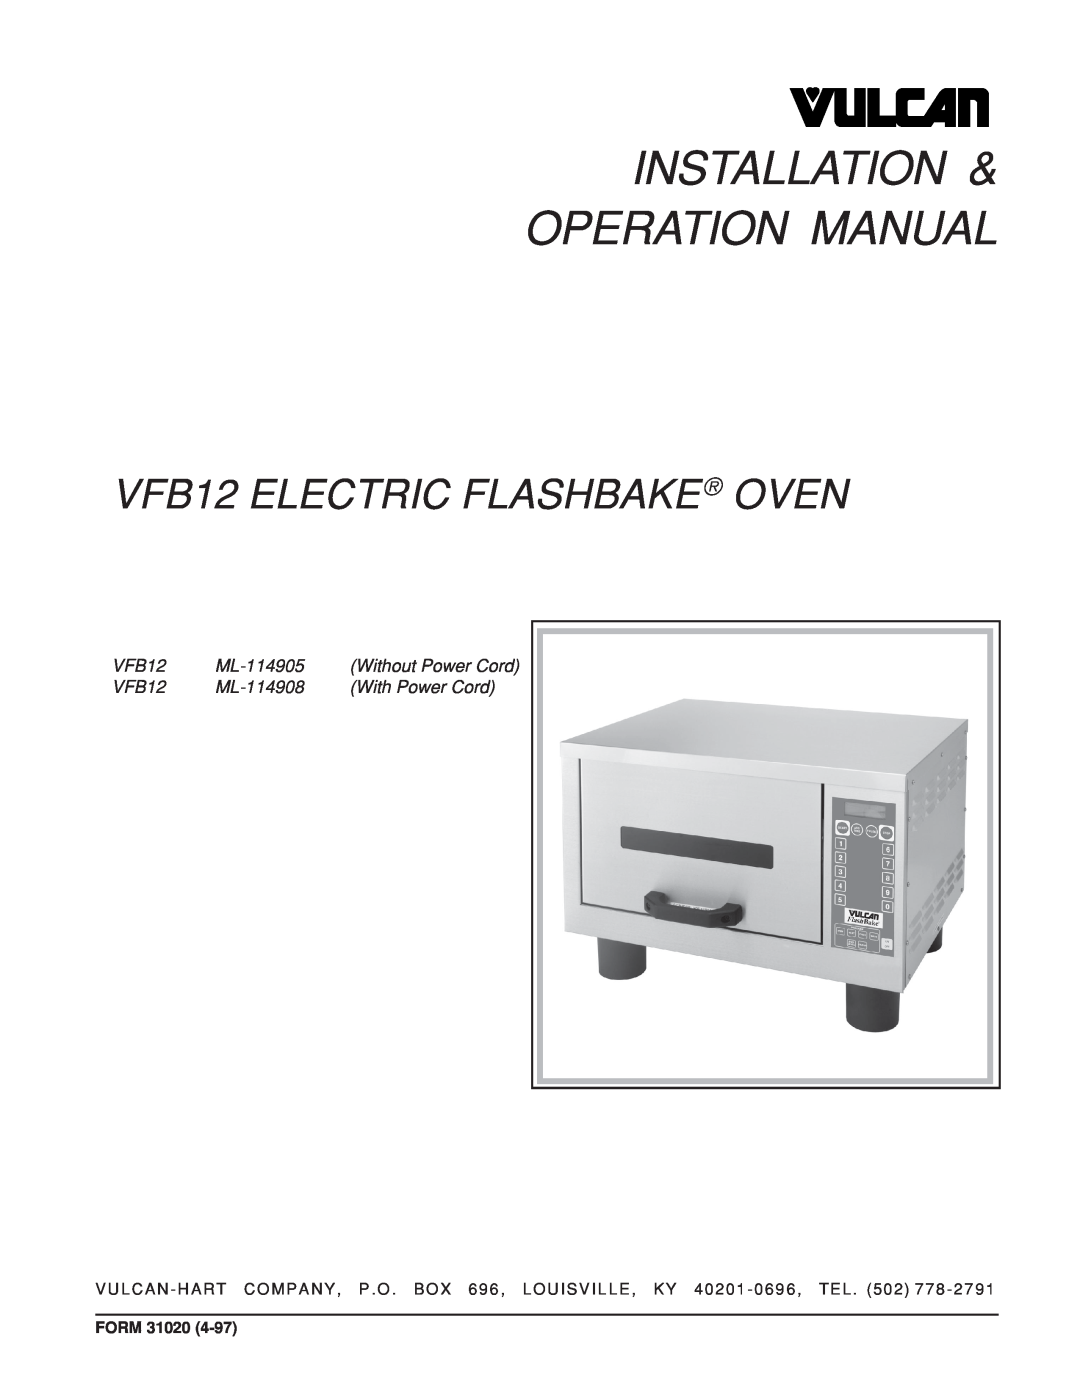 Vulcan-Hart ML-114905 operation manual VFB12 ELECTRIC FLASHBAKE OVEN, Without Power Cord, ML-114908, With Power Cord, Form 